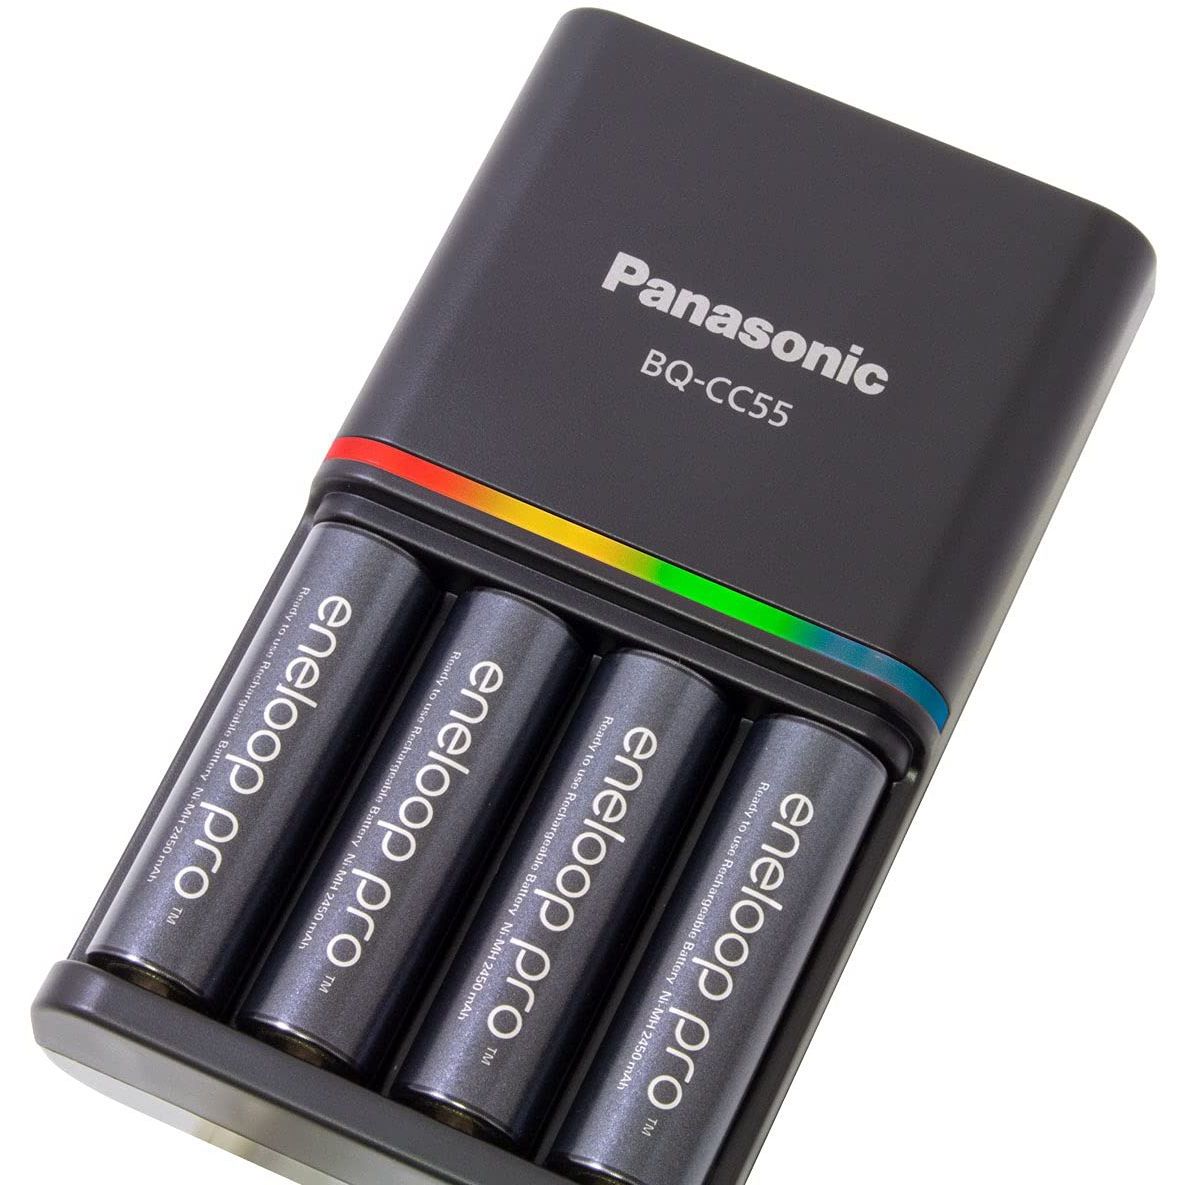 Prodive Imaging Official  Panasonic Eneloop Pro 4X AA 2550mah with Charger